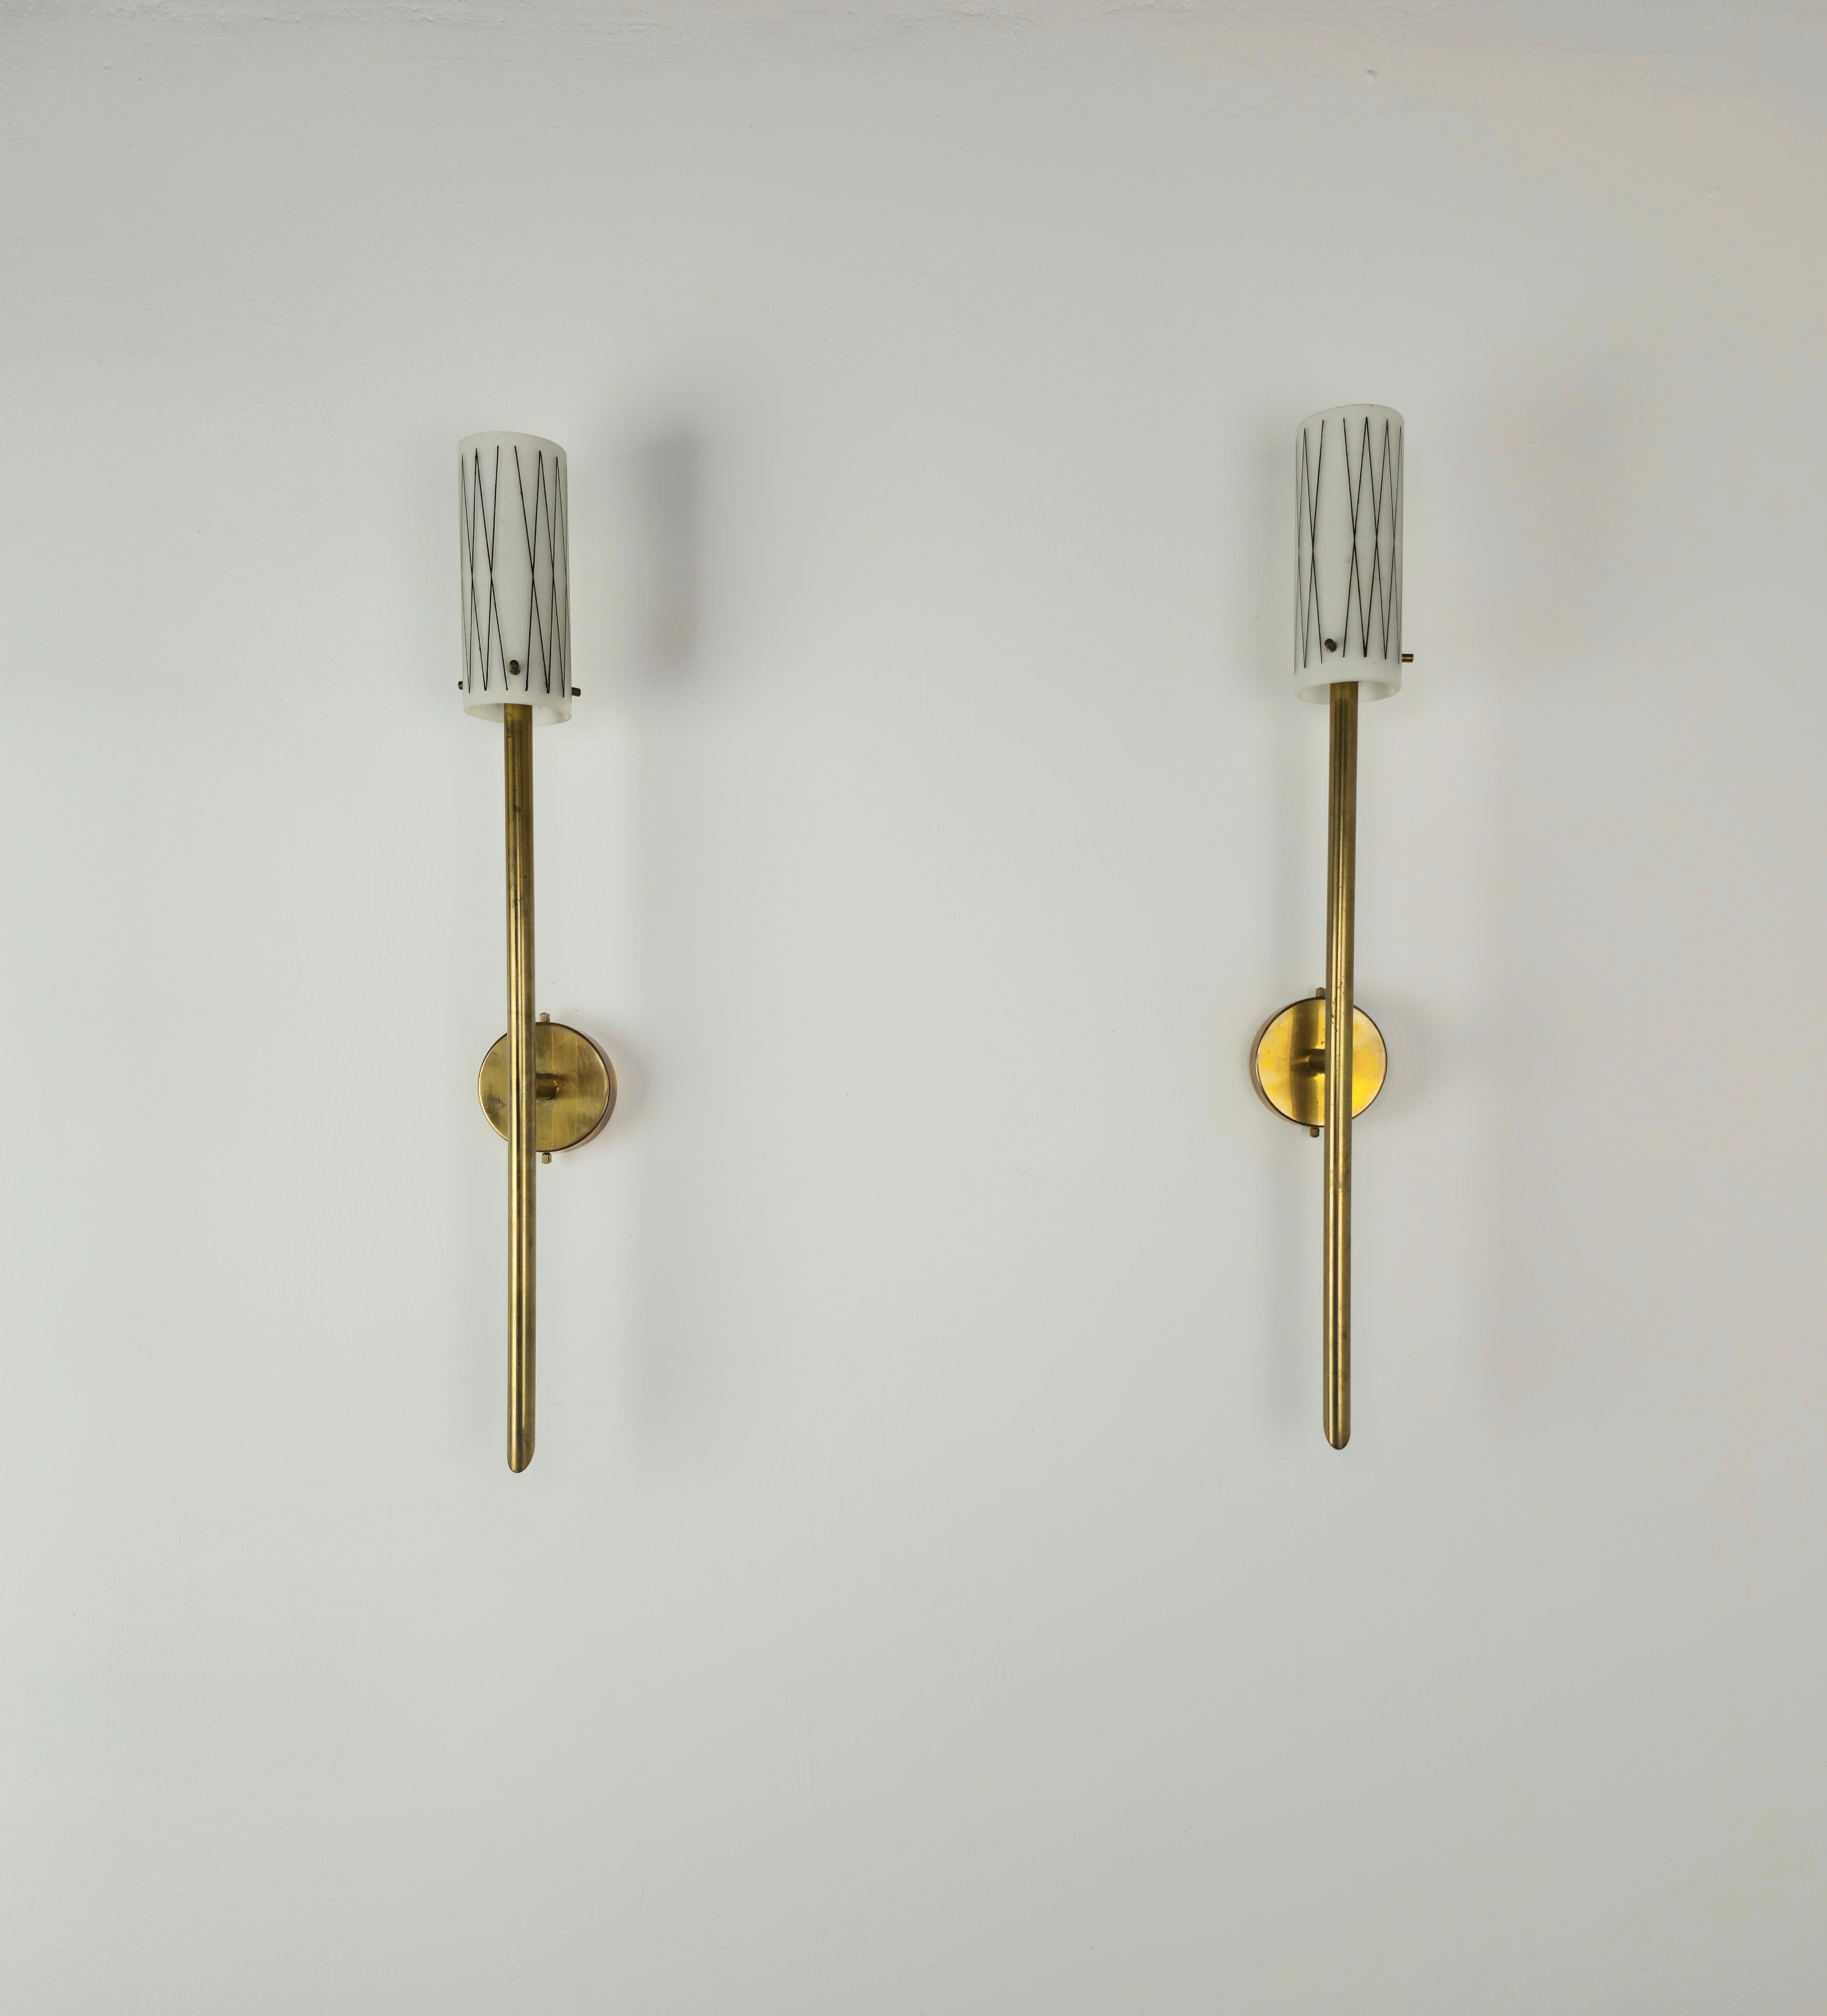 Mid-Century Modern Pair of Wall Lights Sconces Brass Opaline Glass Midcentury Italian Design 1950s  For Sale